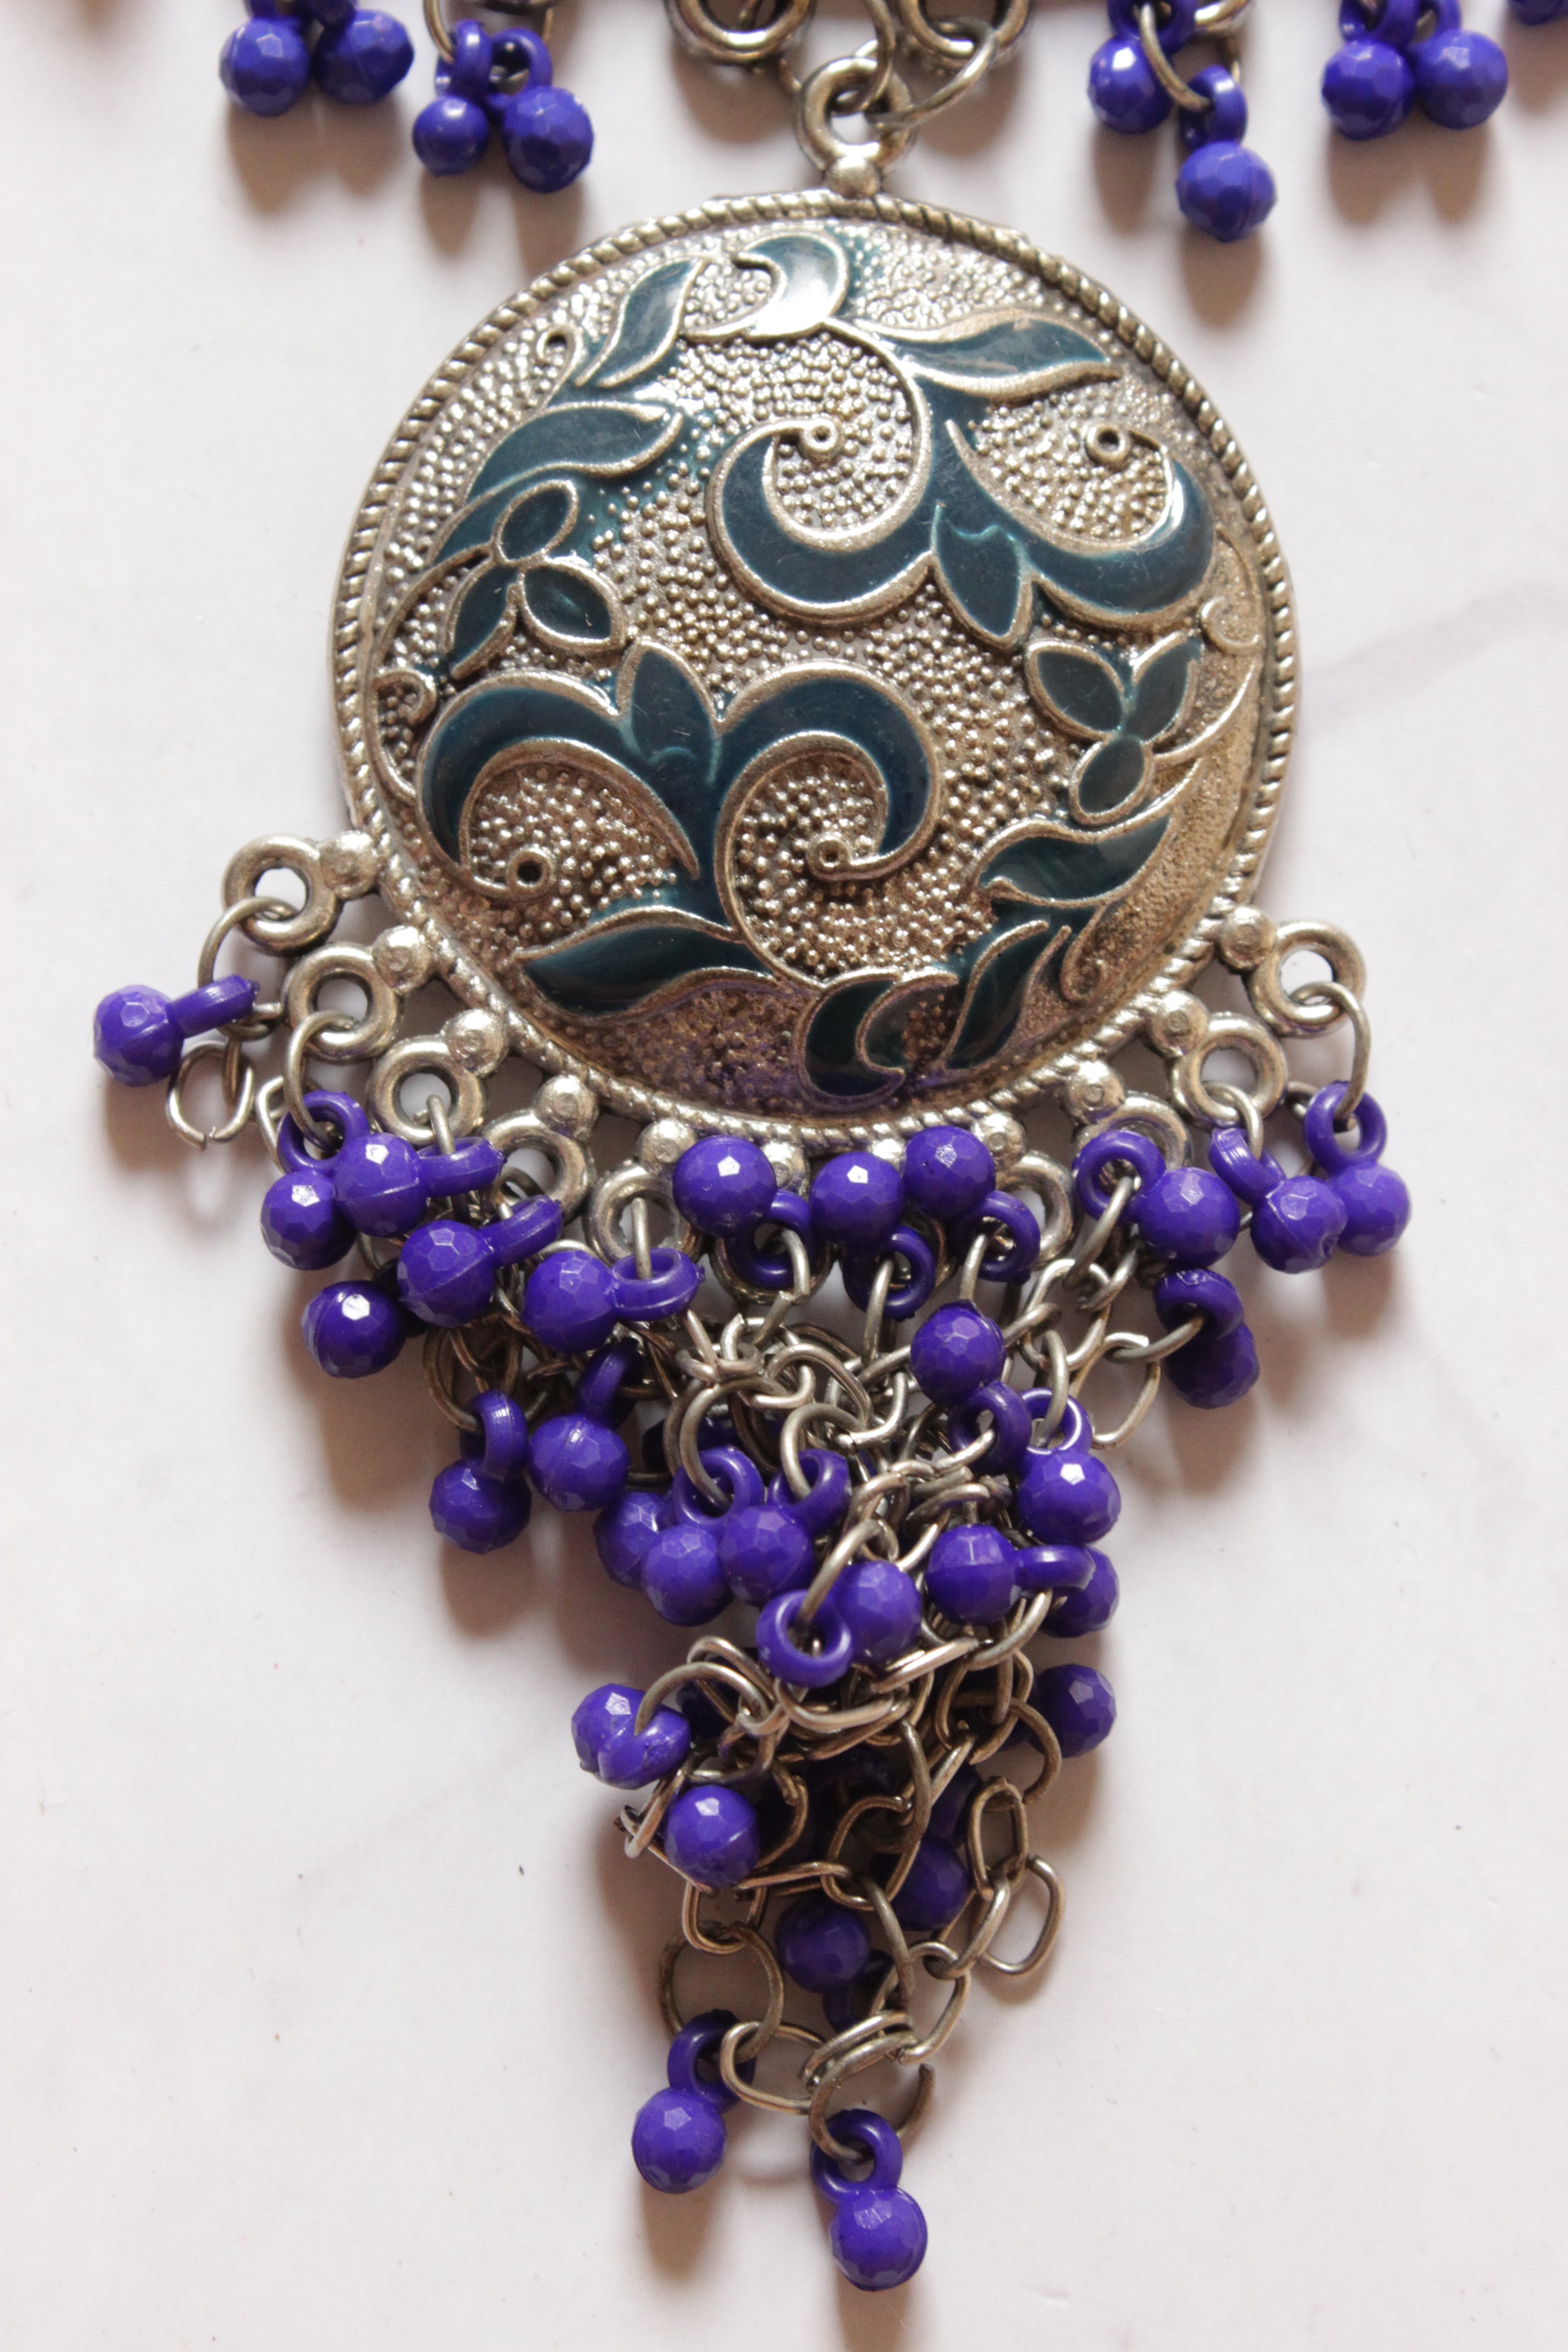 Silver Finish Tibetan Necklace Accentuated with Violet Beads